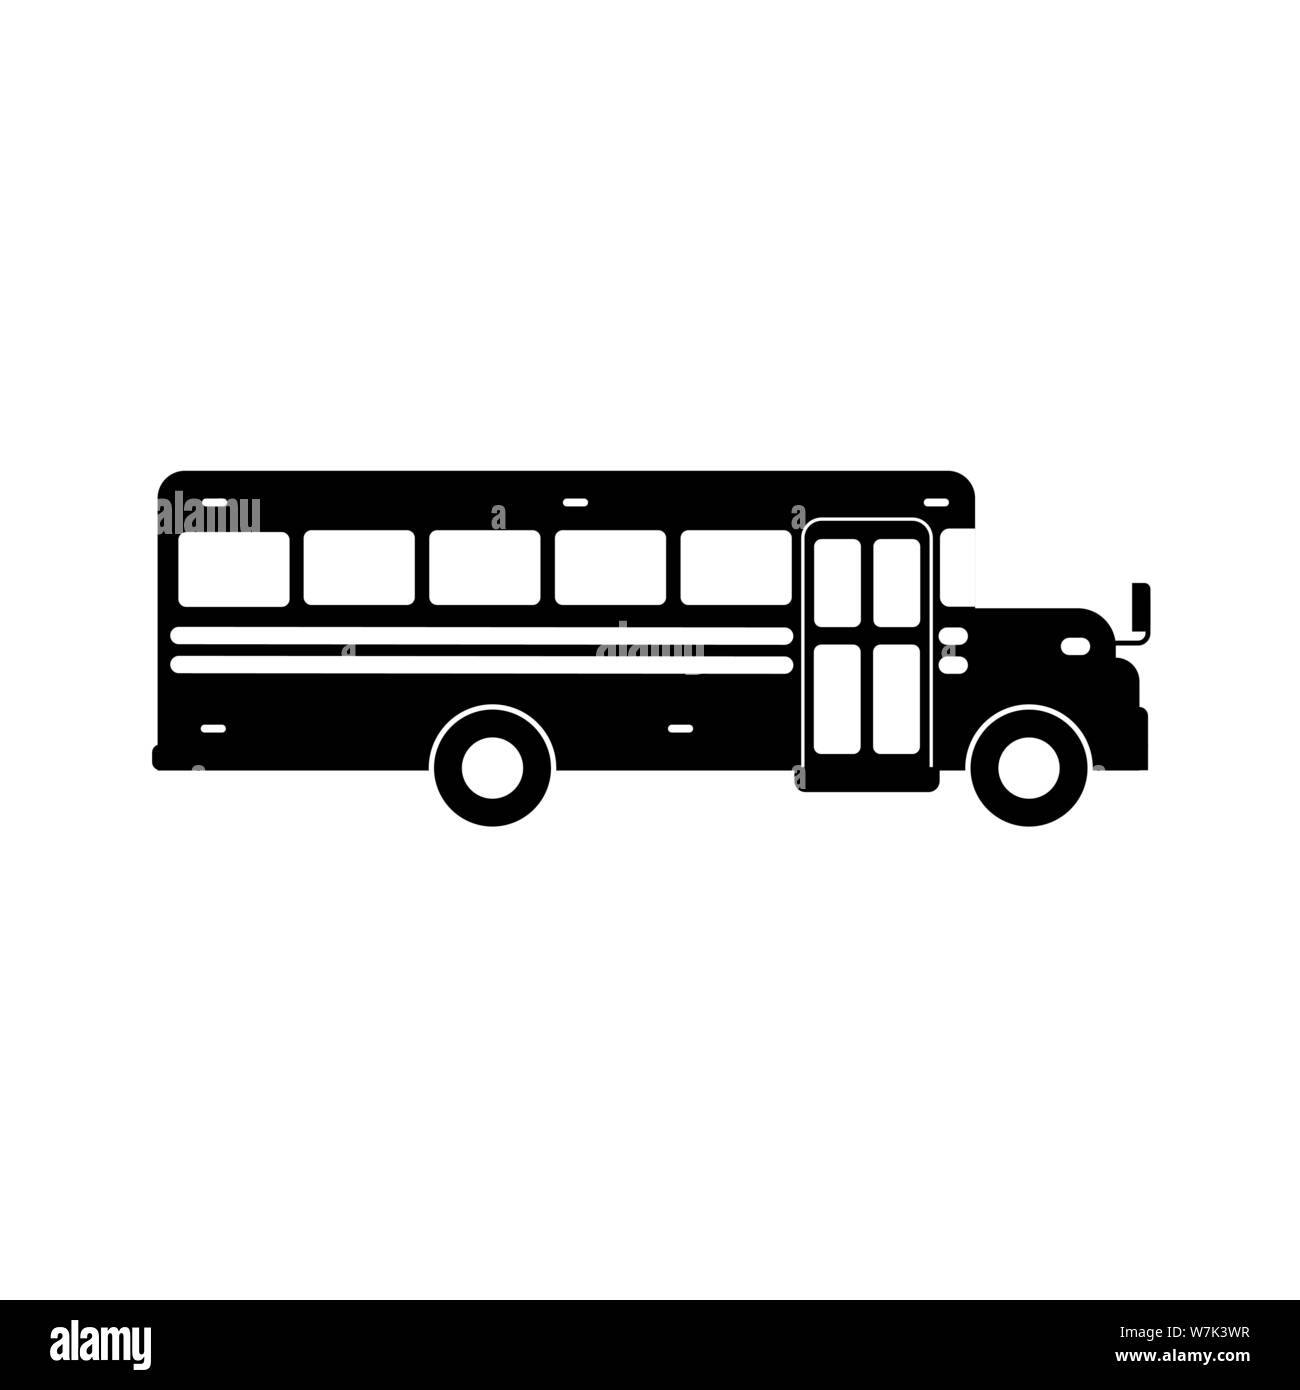 School bus icon simple design on white background Stock Vector